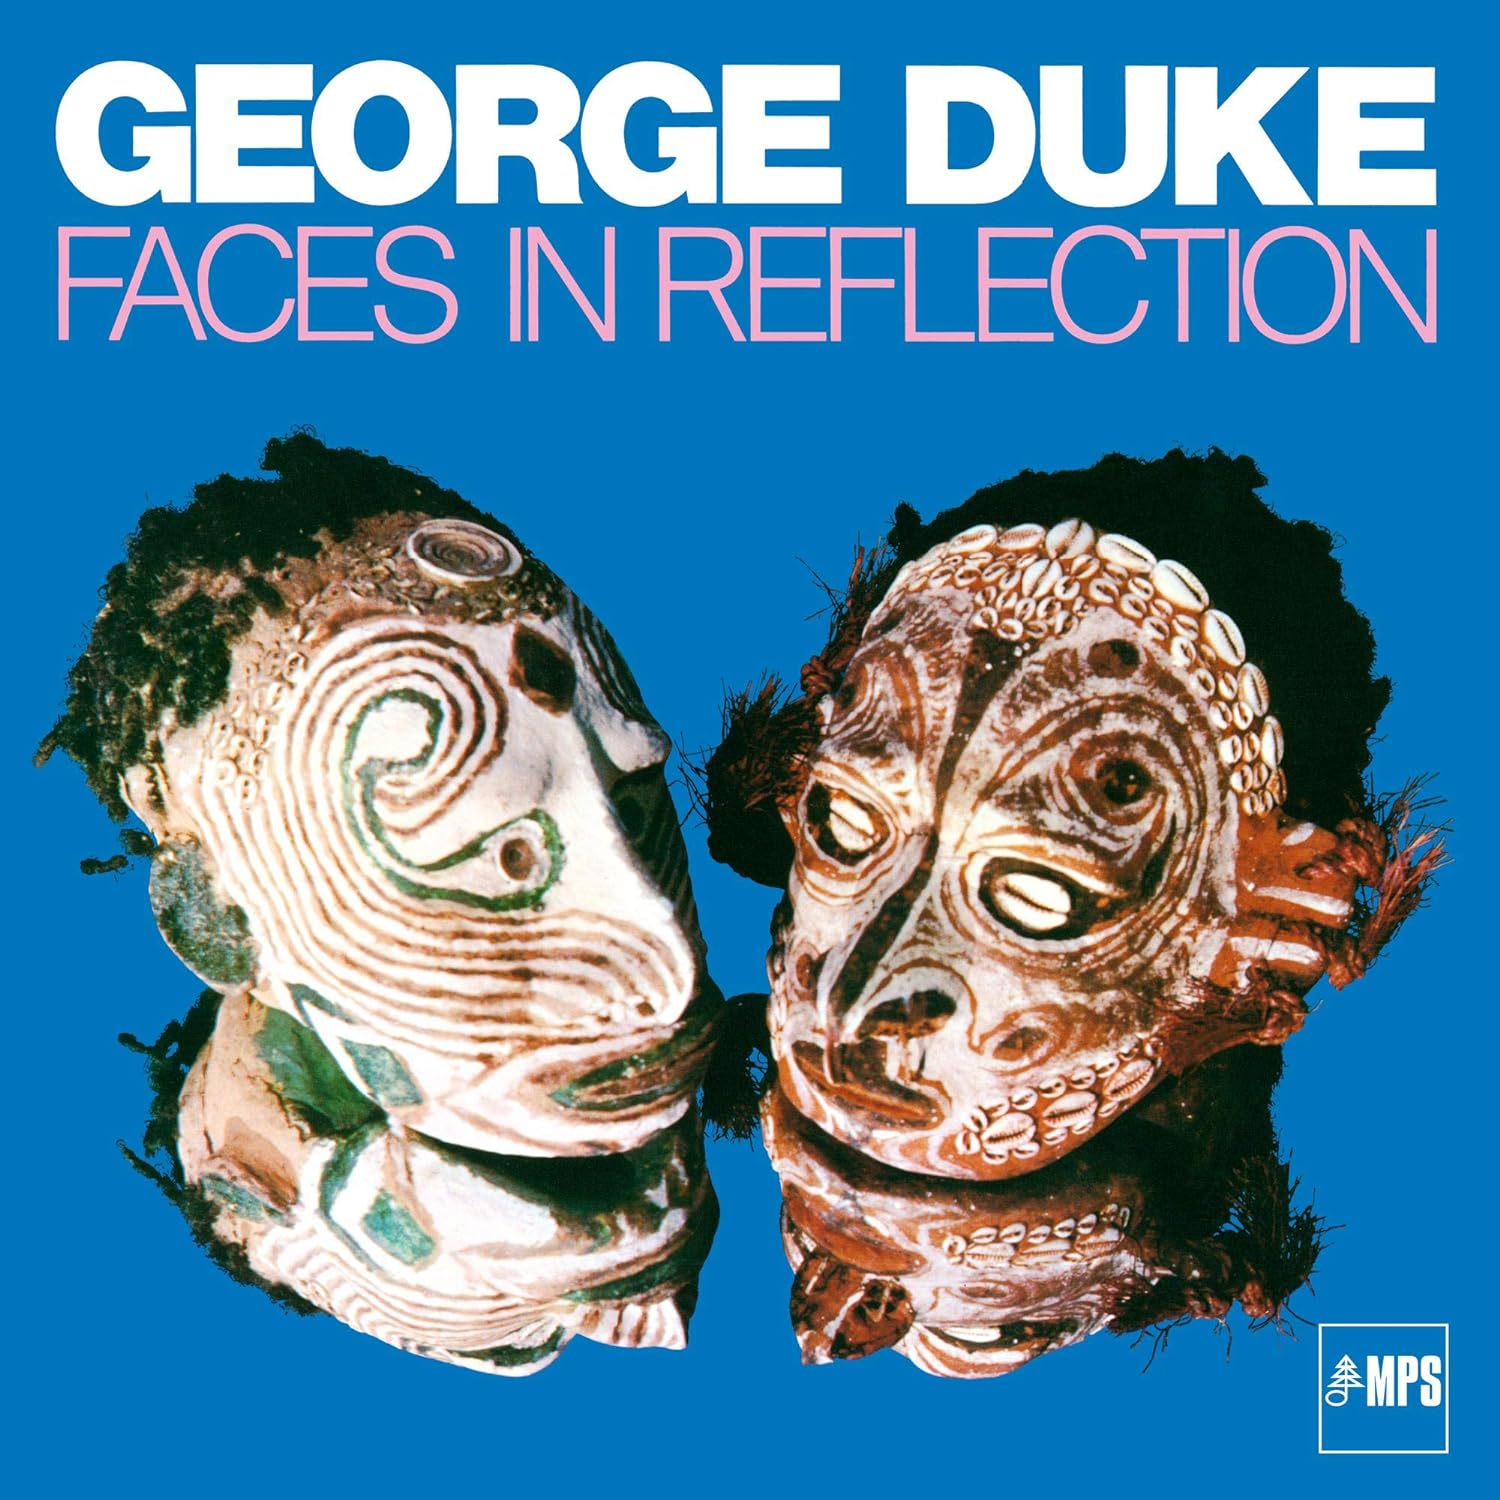 DUKE, GEORGE - FACES IN REFLECTION (180 GR PRESSING) - LP